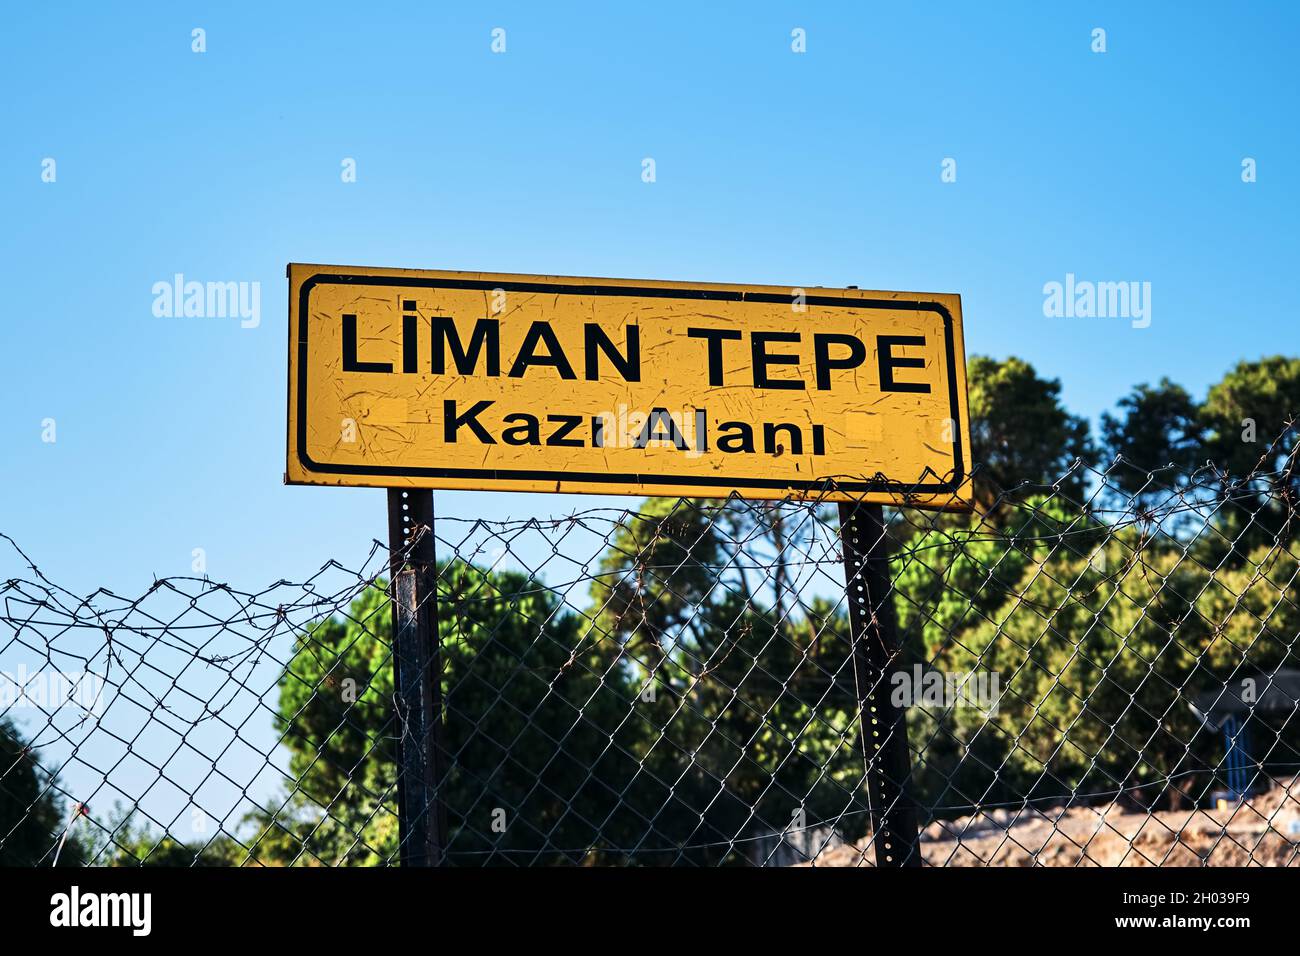 Urla, Turkey - September, 2021: The sign of archaeological excavation site of the ancient prehistoric bronze age town Liman Tepe or Limantepe in Urla, Stock Photo